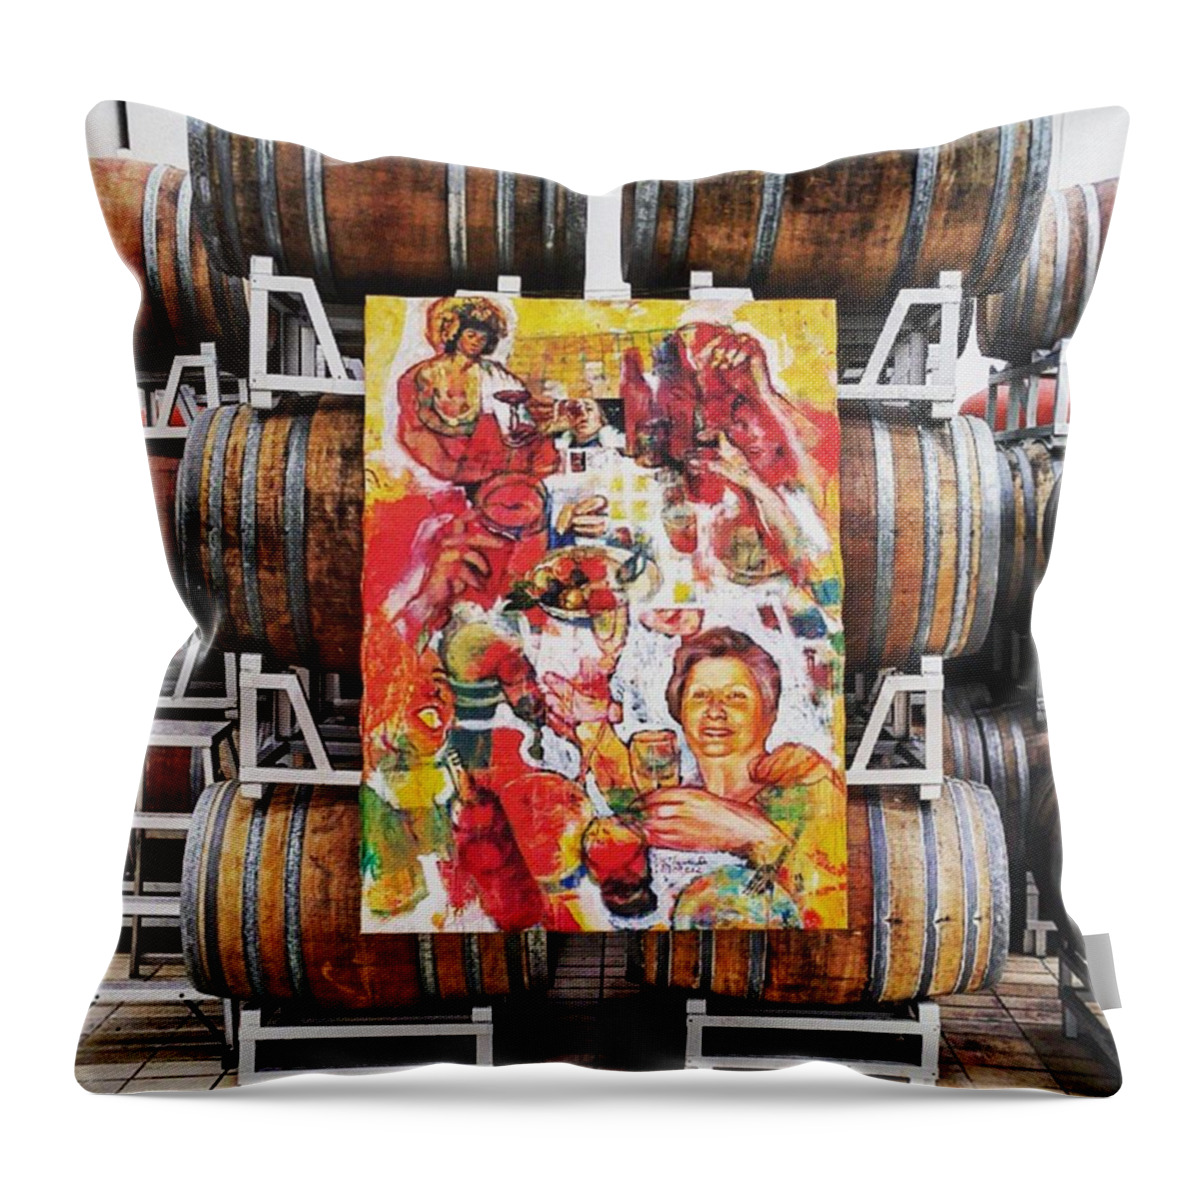 Barberani Throw Pillow featuring the photograph Botti D'arte by Simone Moncelsi